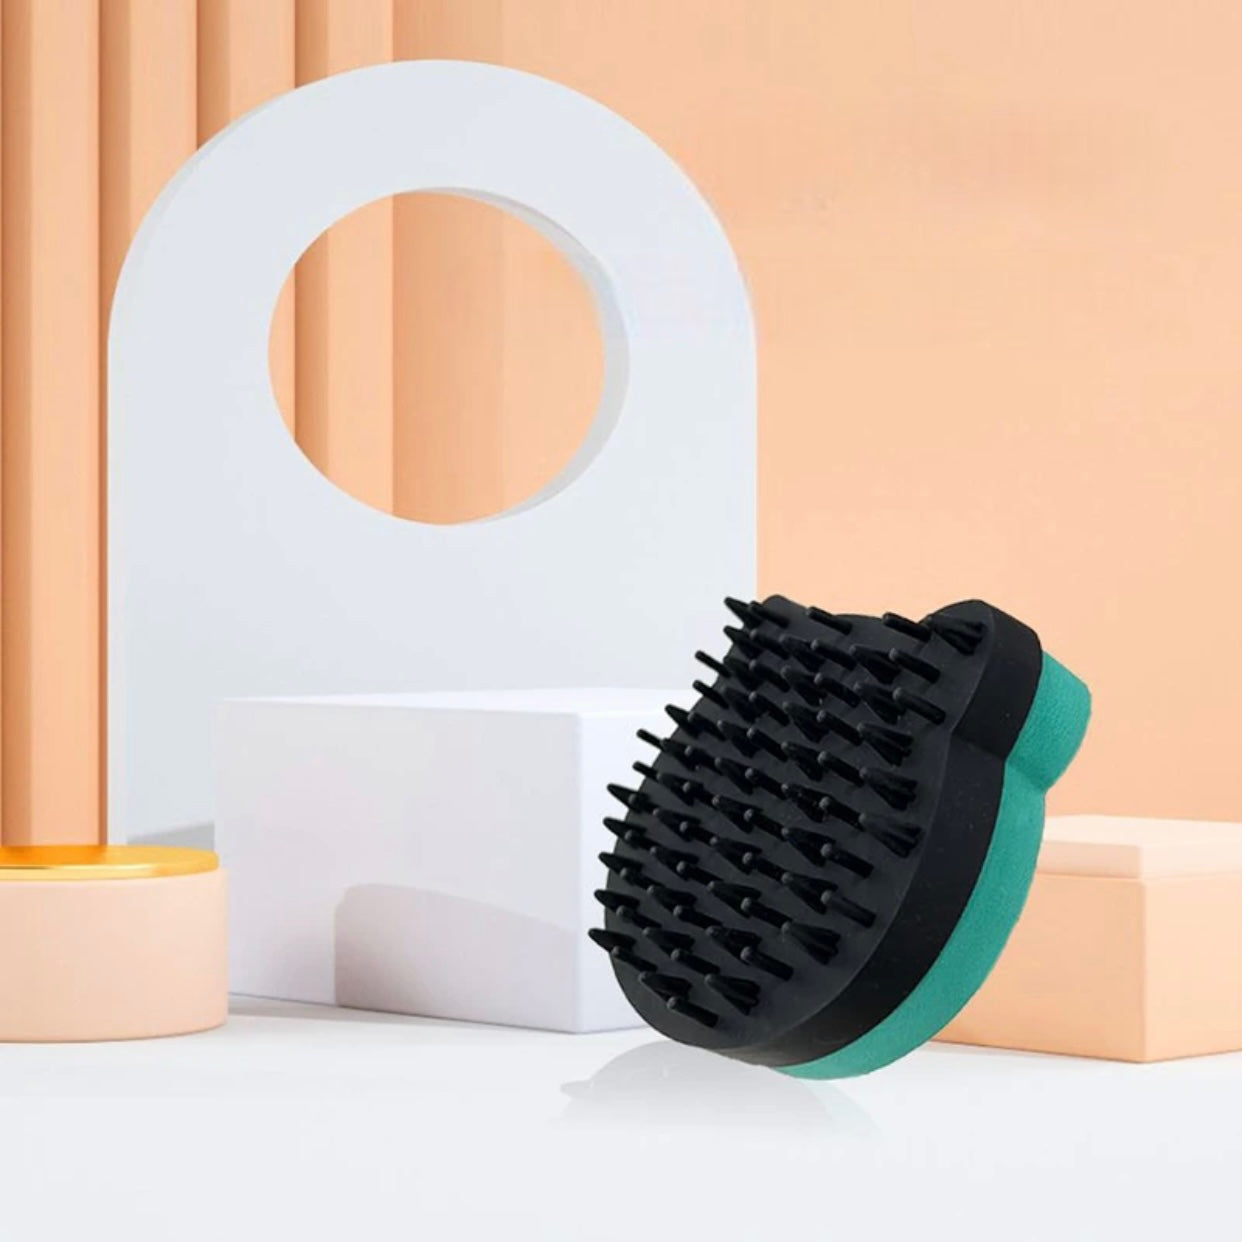 Soft Pins Pet Deshedding Brush - Gentle Grooming for Your Beloved Companion